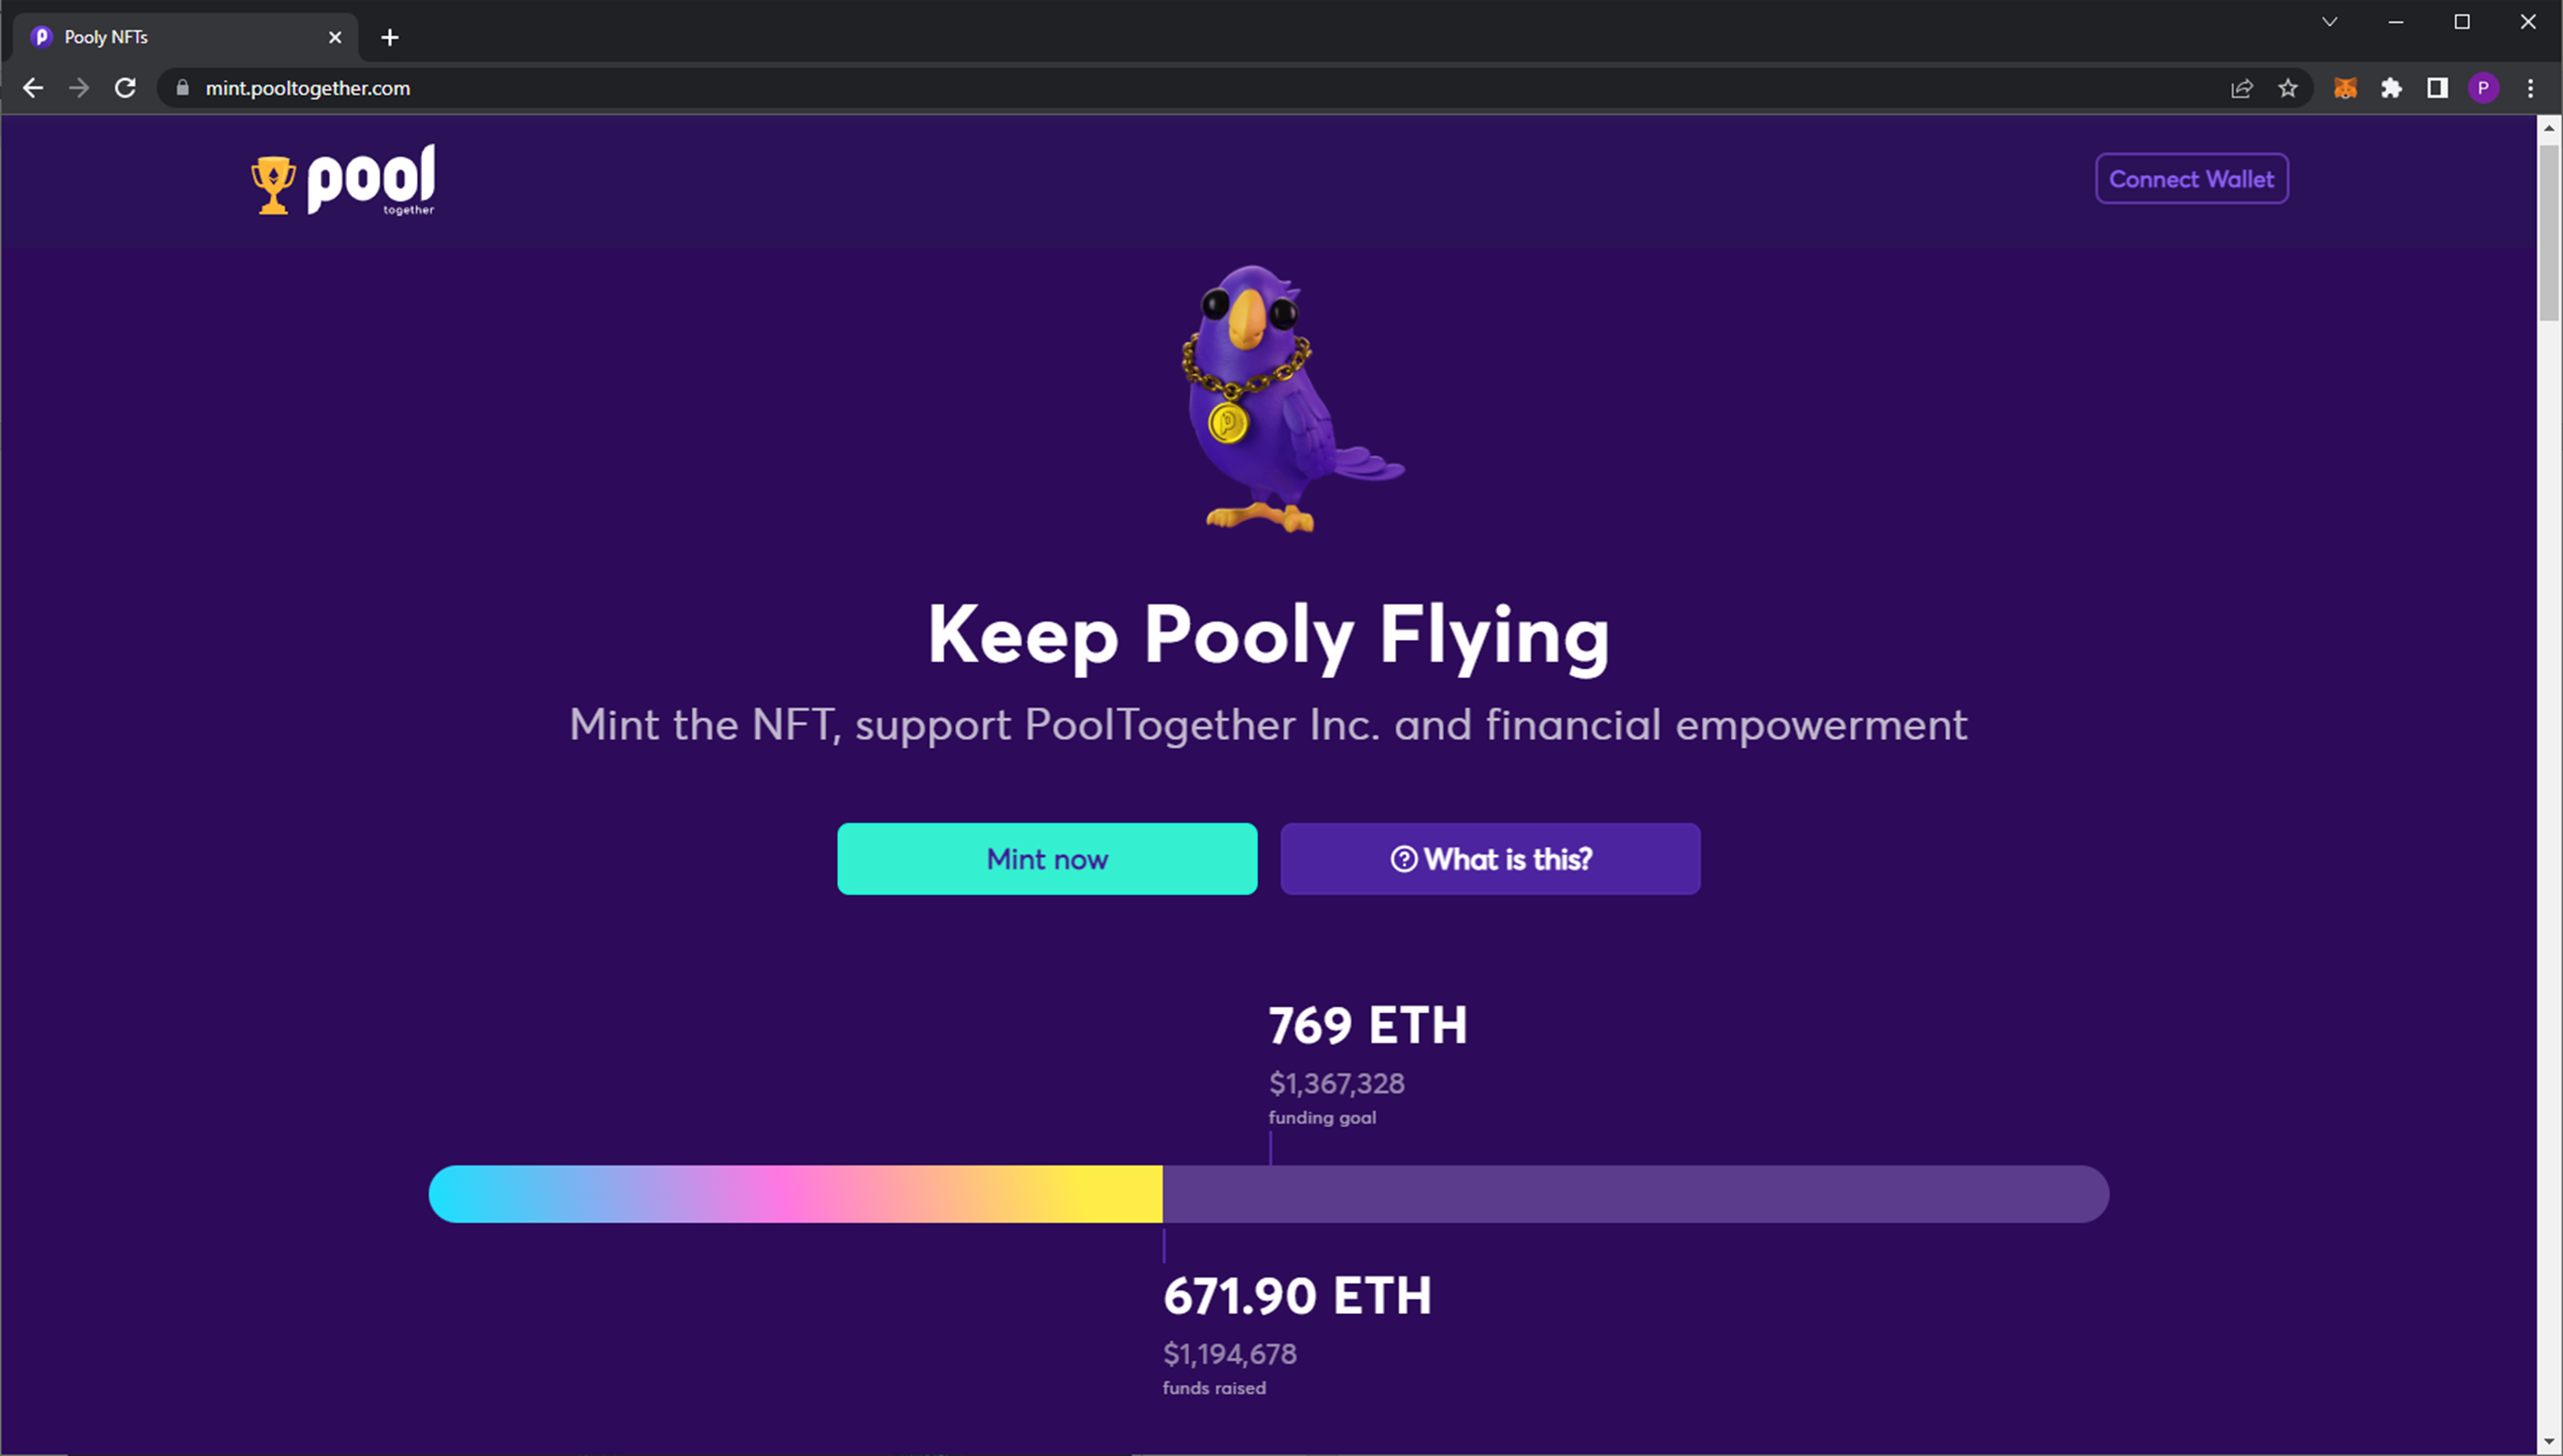 Pooly NFT landing page with funding tracker. Source: https://mint.pooltogether.com/